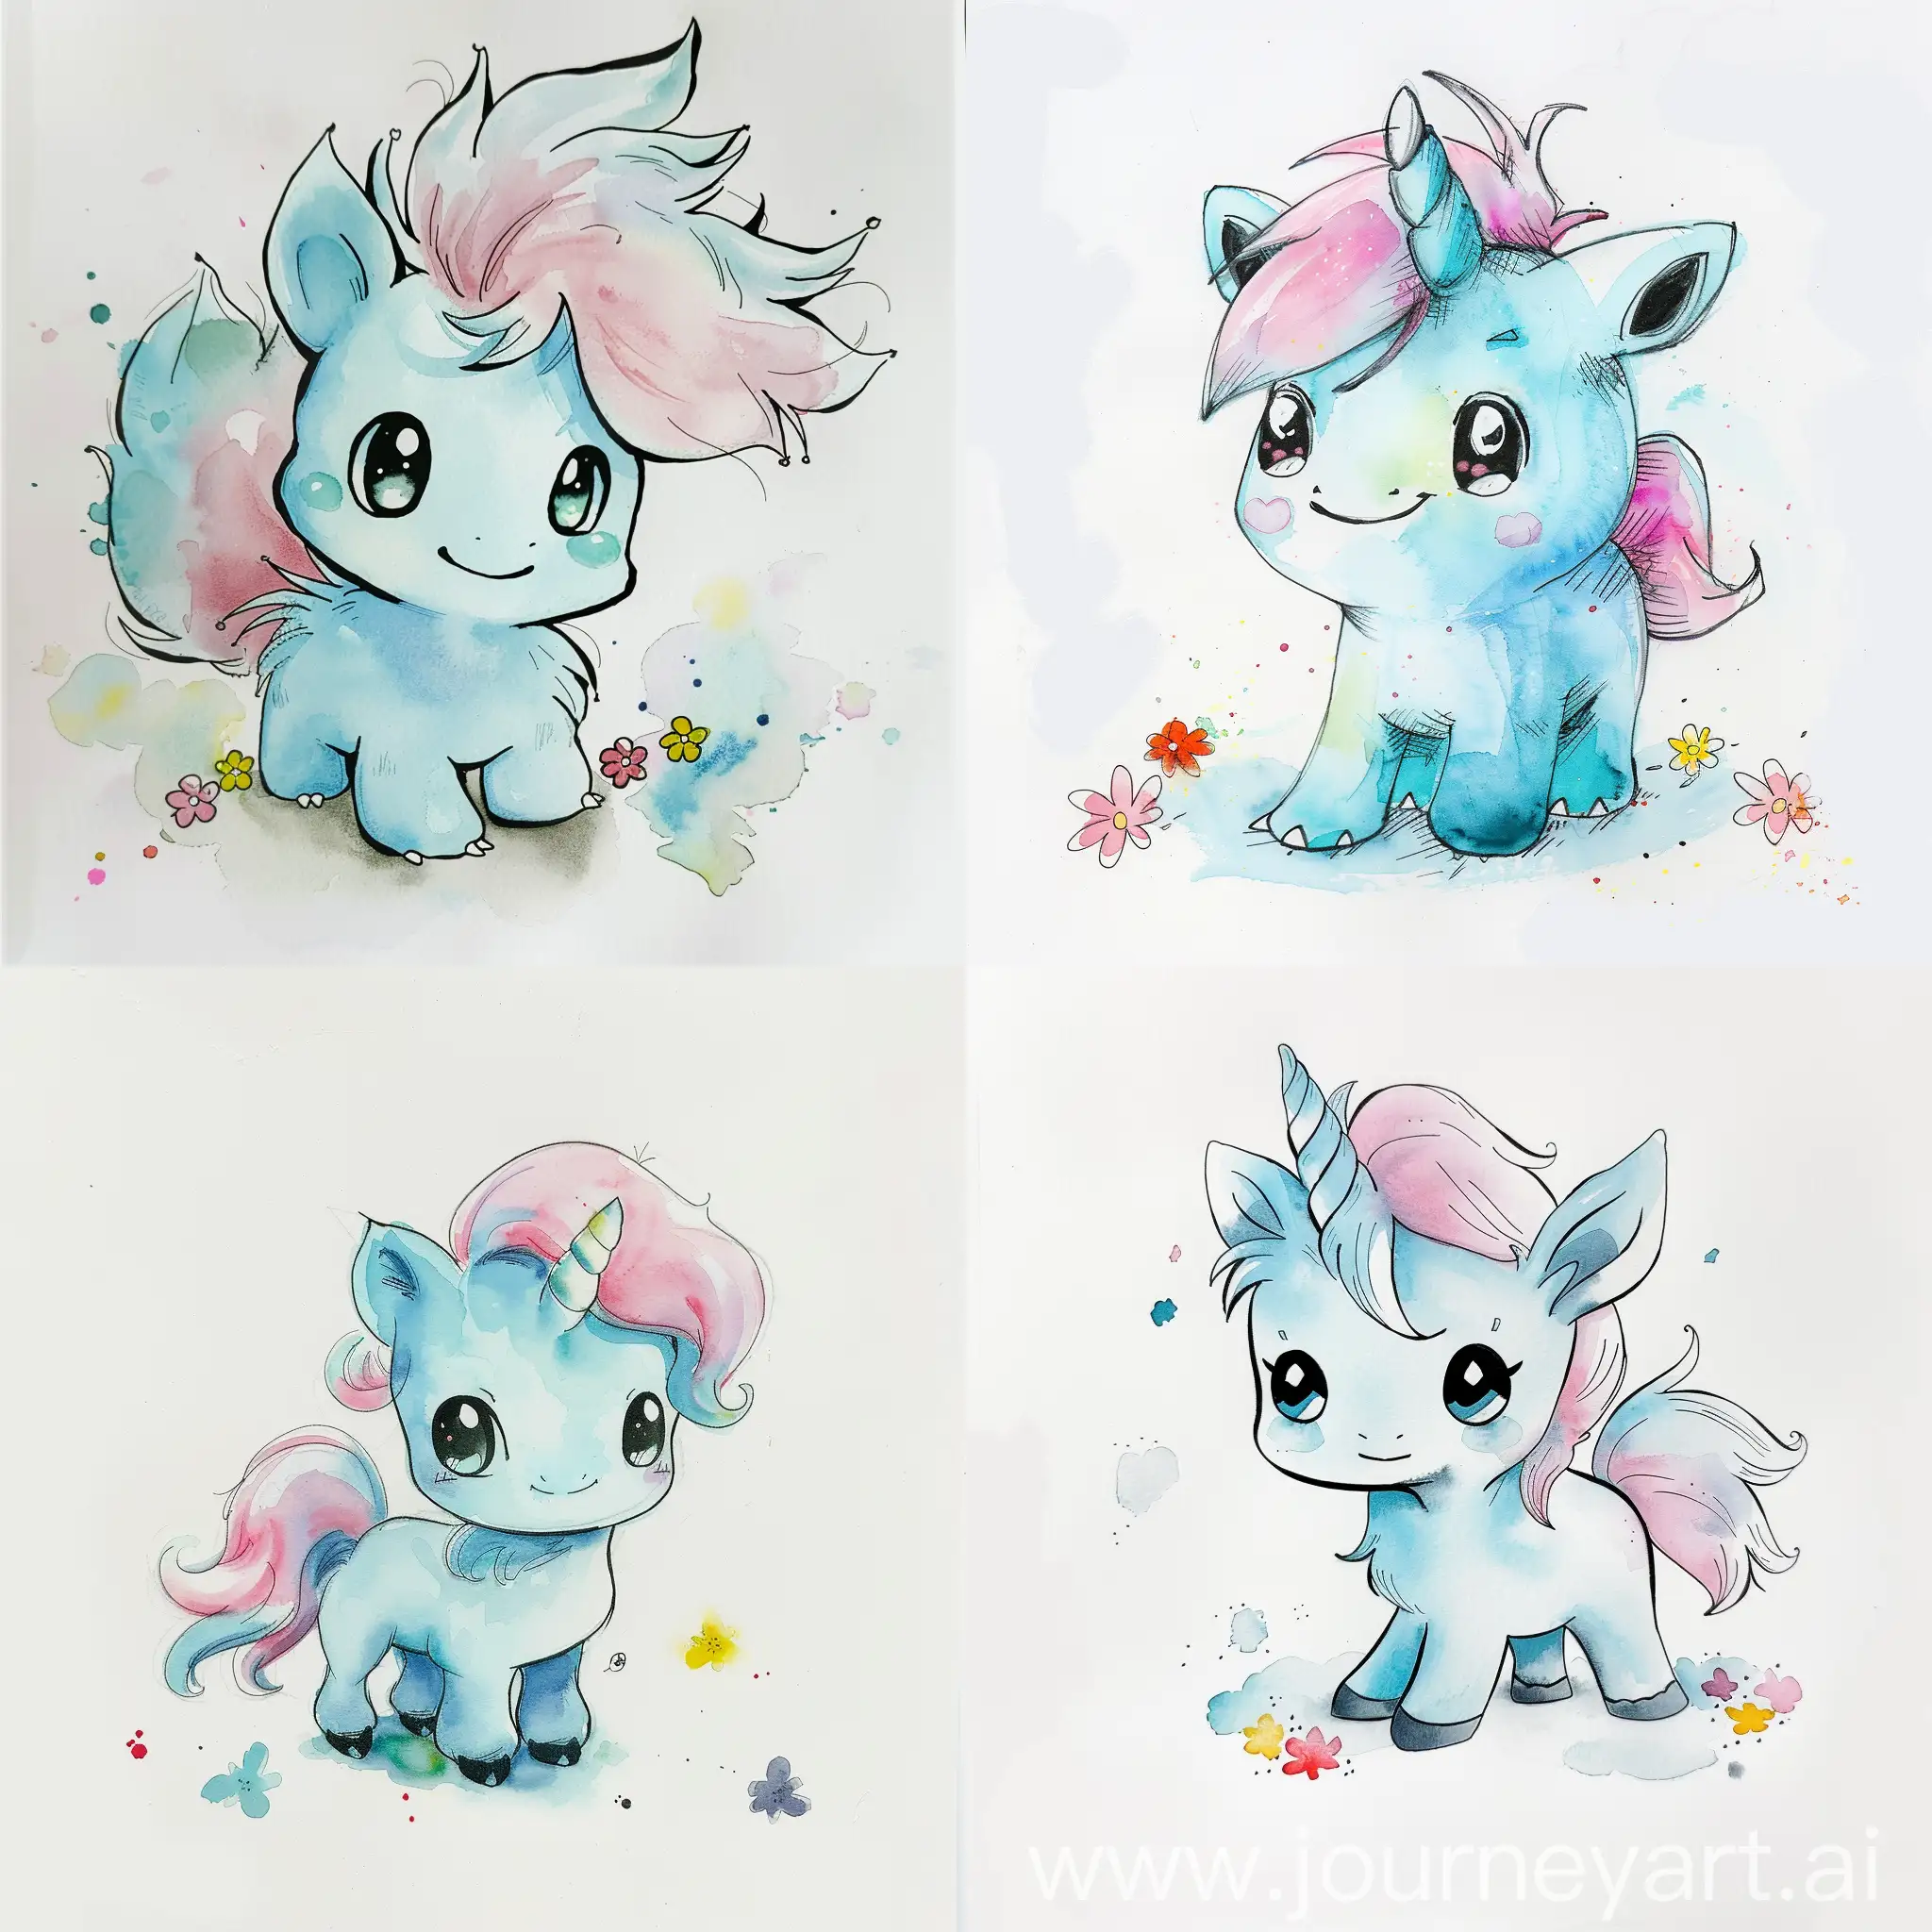 A watercolor painting in the style of Pokemon with black line art. Imagine a cute, two-legged creature with soft blue fur and a flowing pink mane. It has big, curious eyes and a playful smile. The Pokemon stands alone on a clean white background, with a few colorful flowers scattered around its feet.